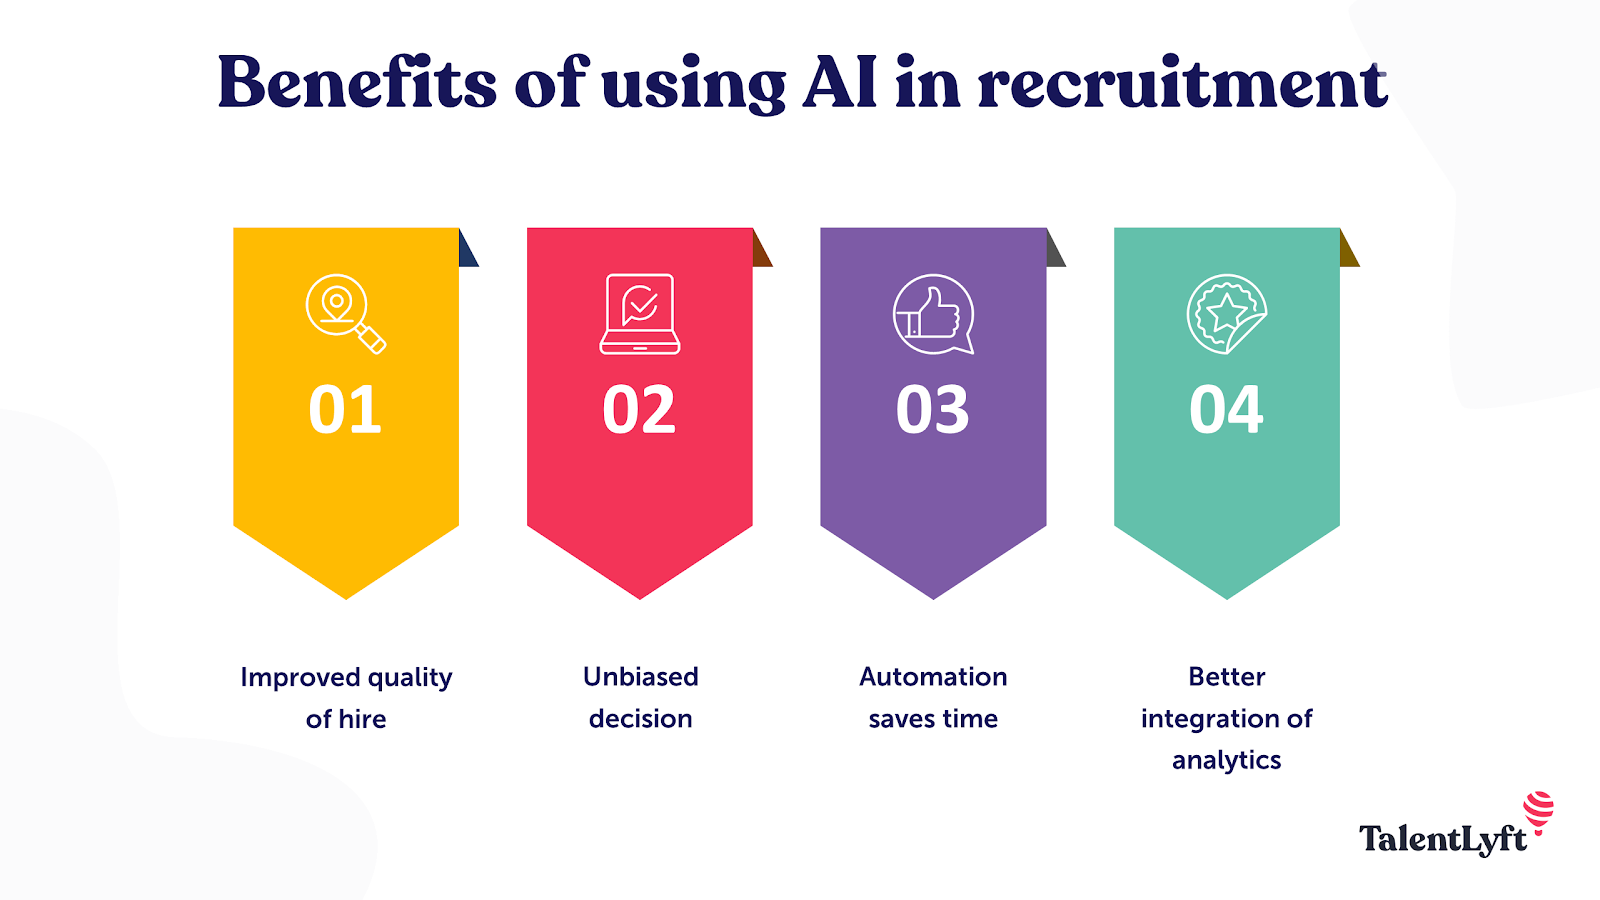 Benefits of using AI in recruitment